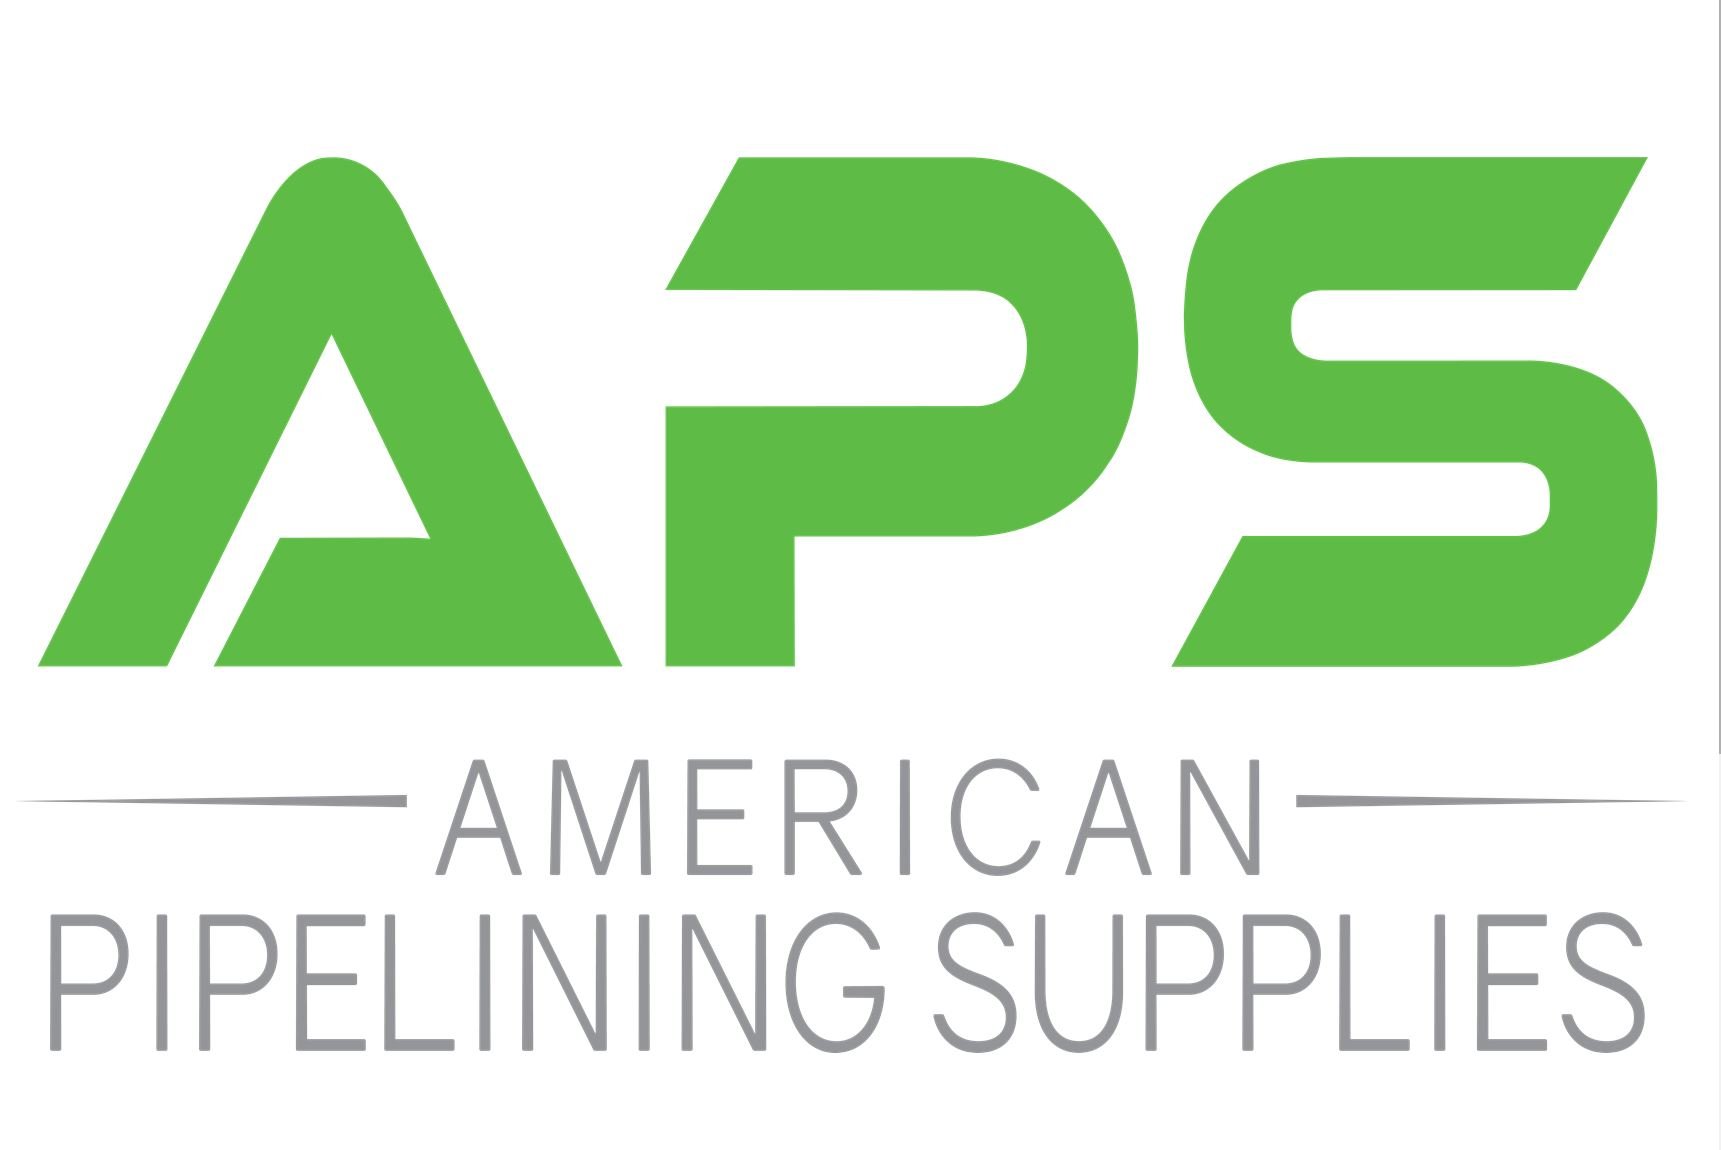 American Pipelining Supplies